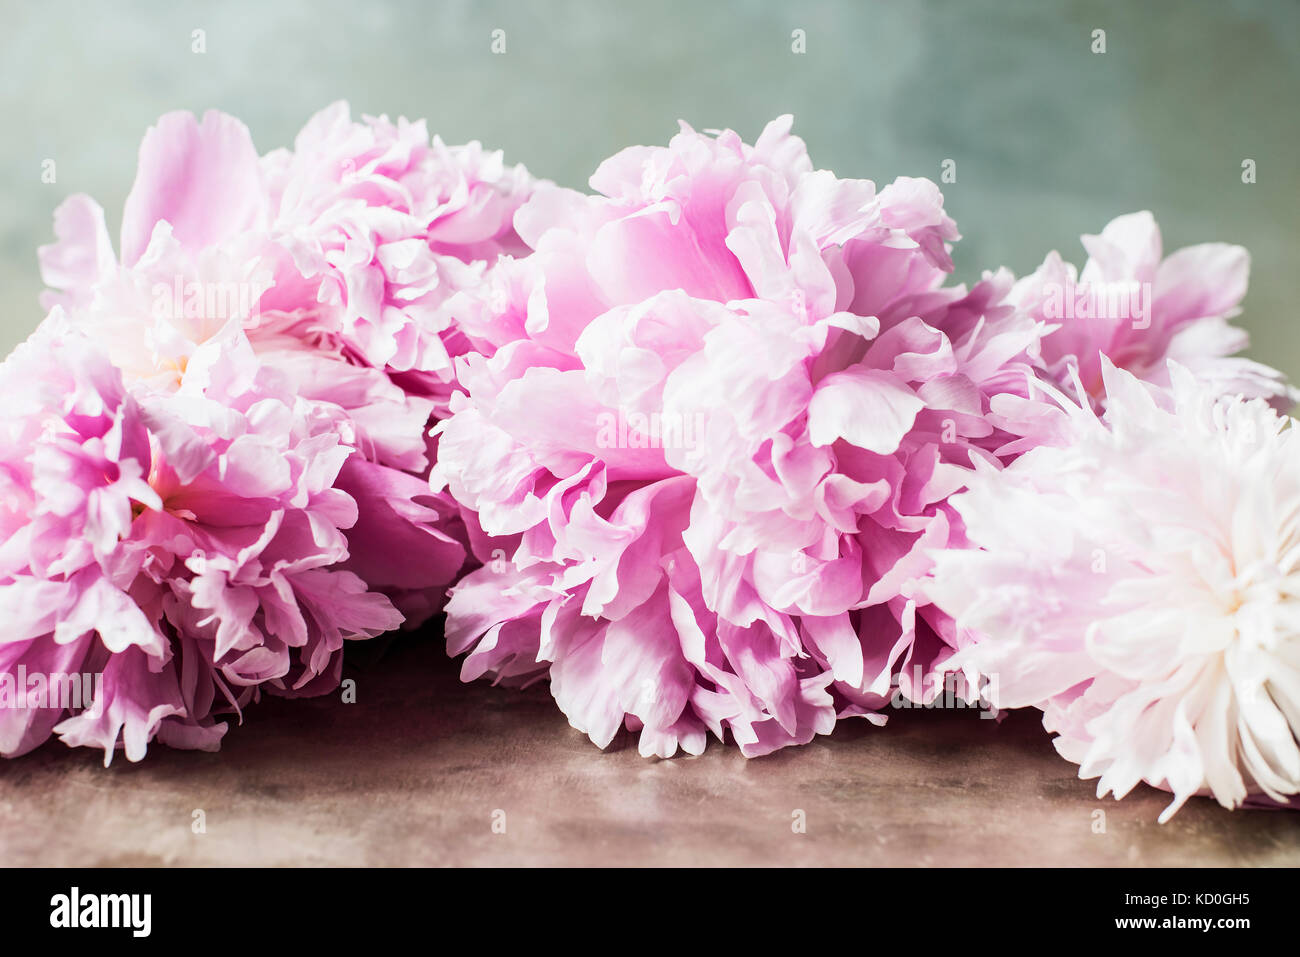 Pink peonies on table Stock Photo